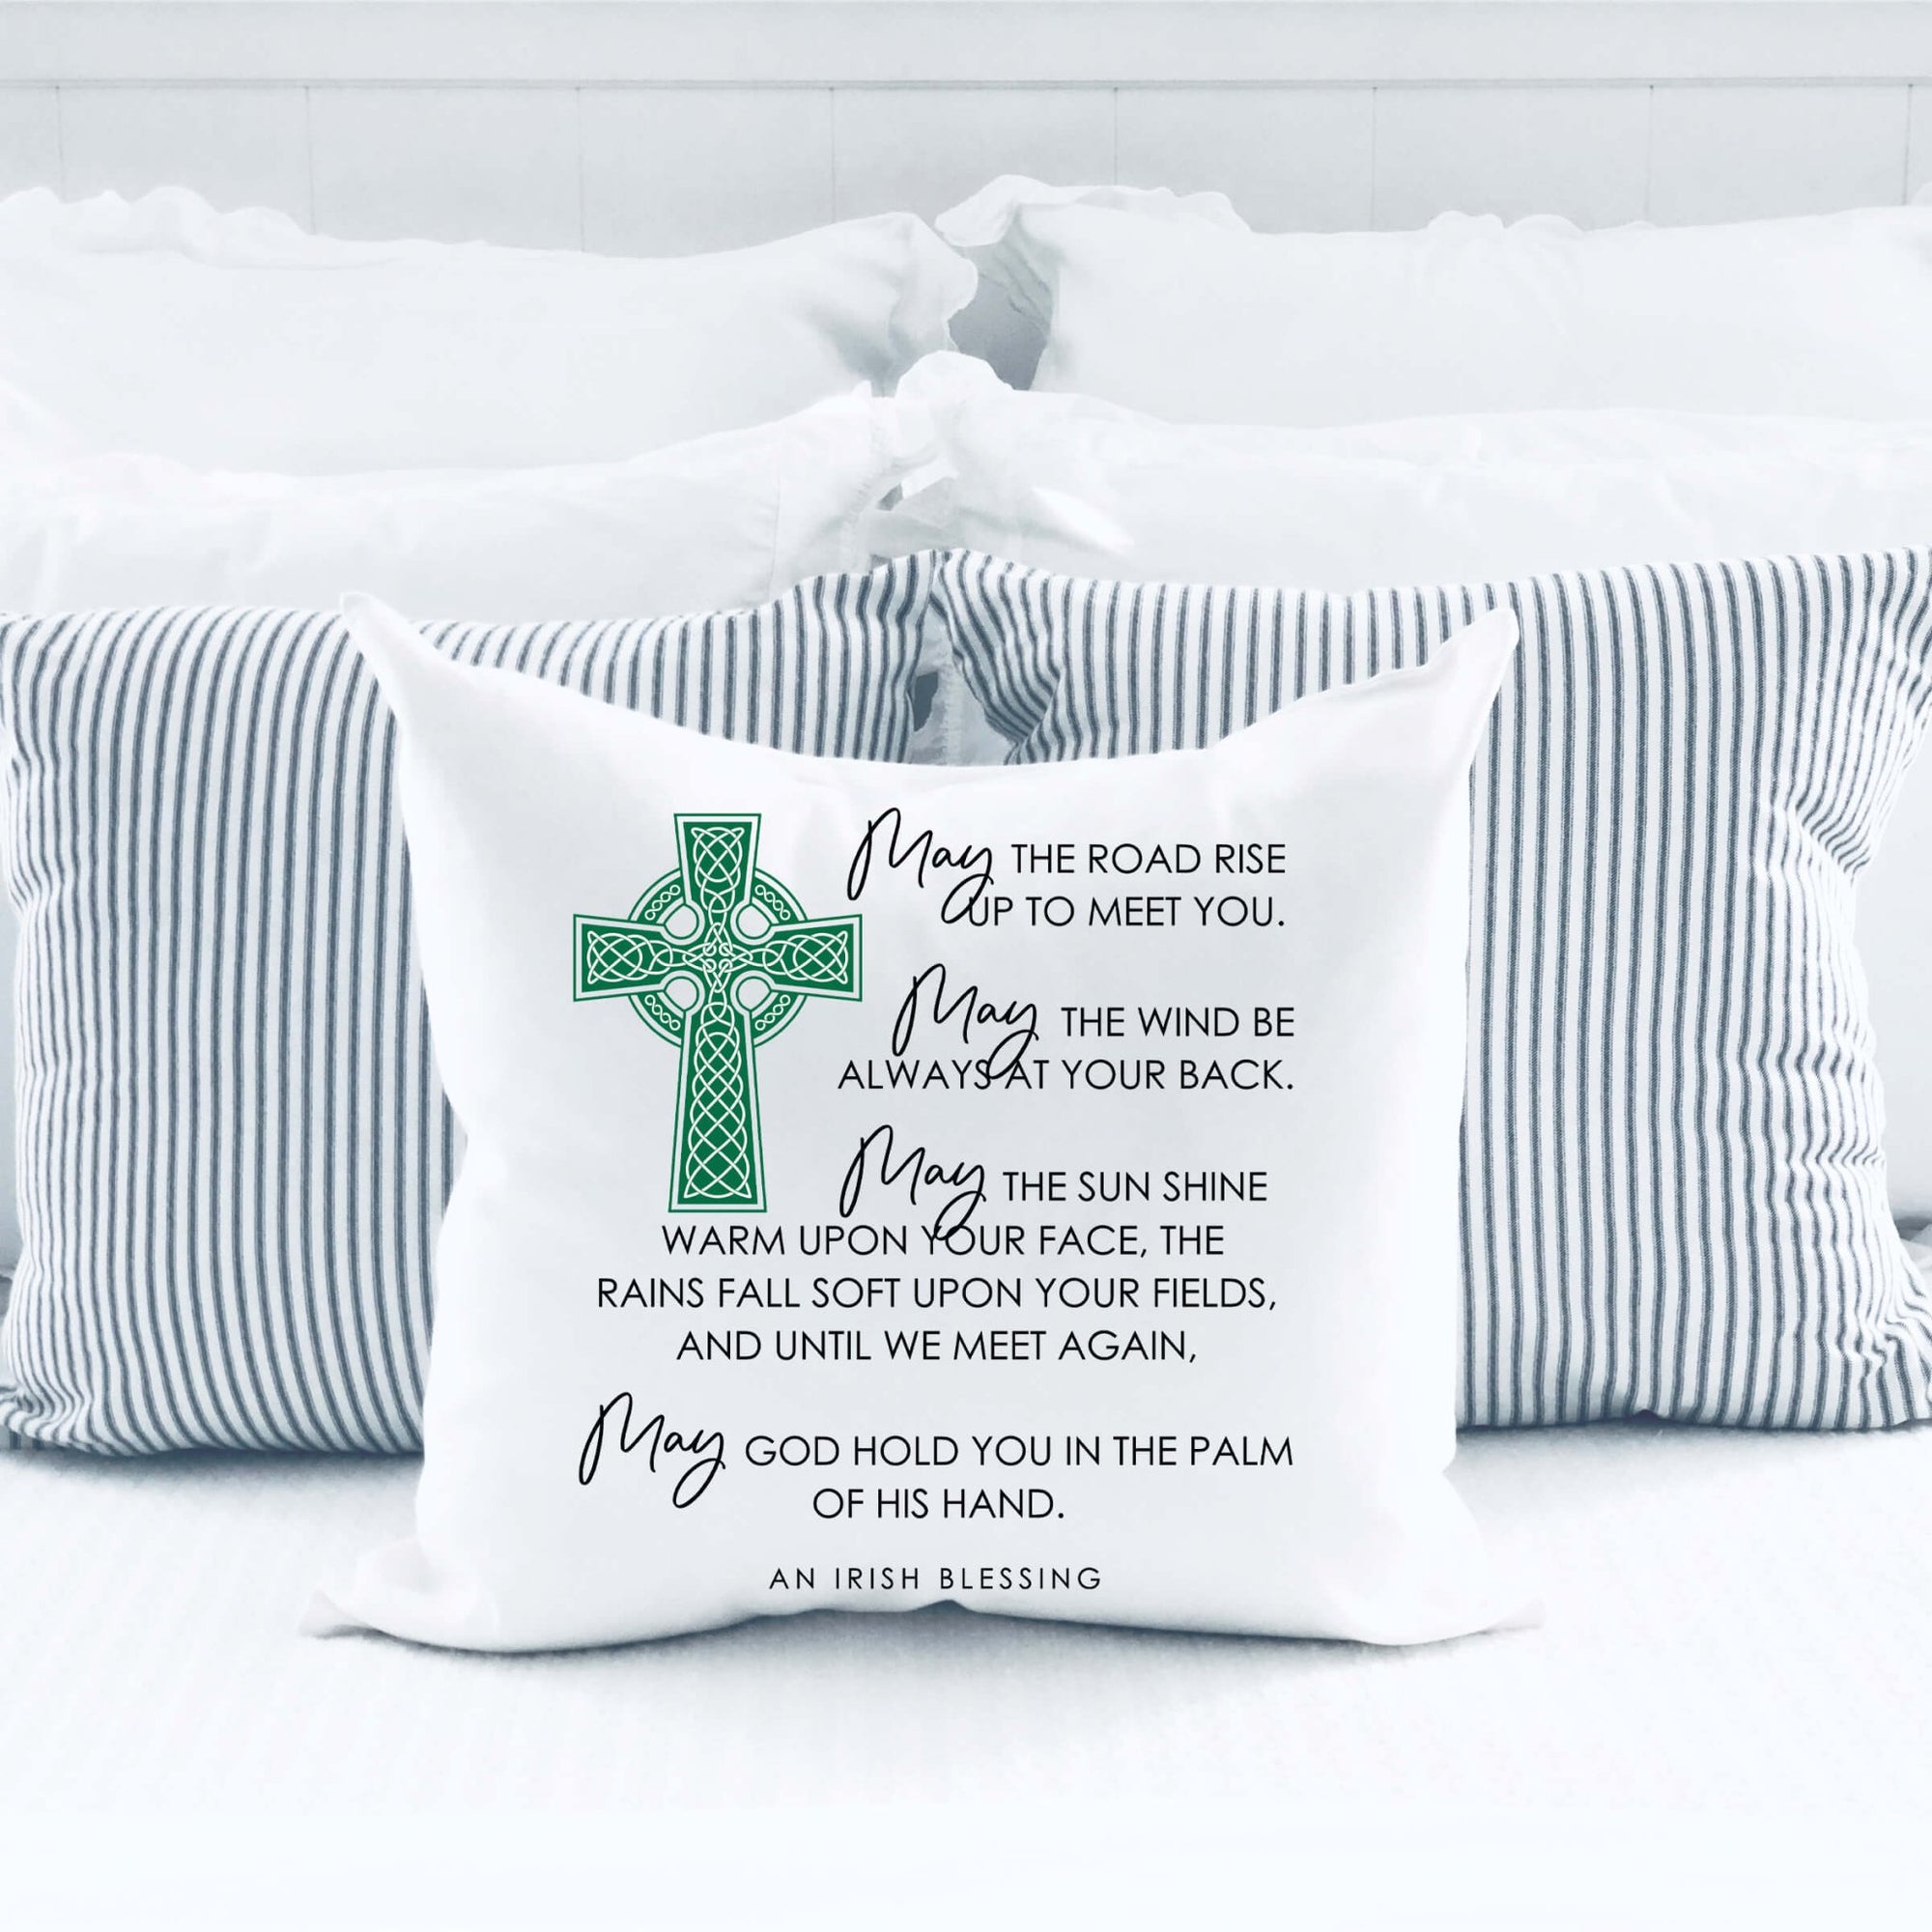 St. Patrick's Day Decorative Throw Pillow - May The Road Rise Up - LifeSong Milestones